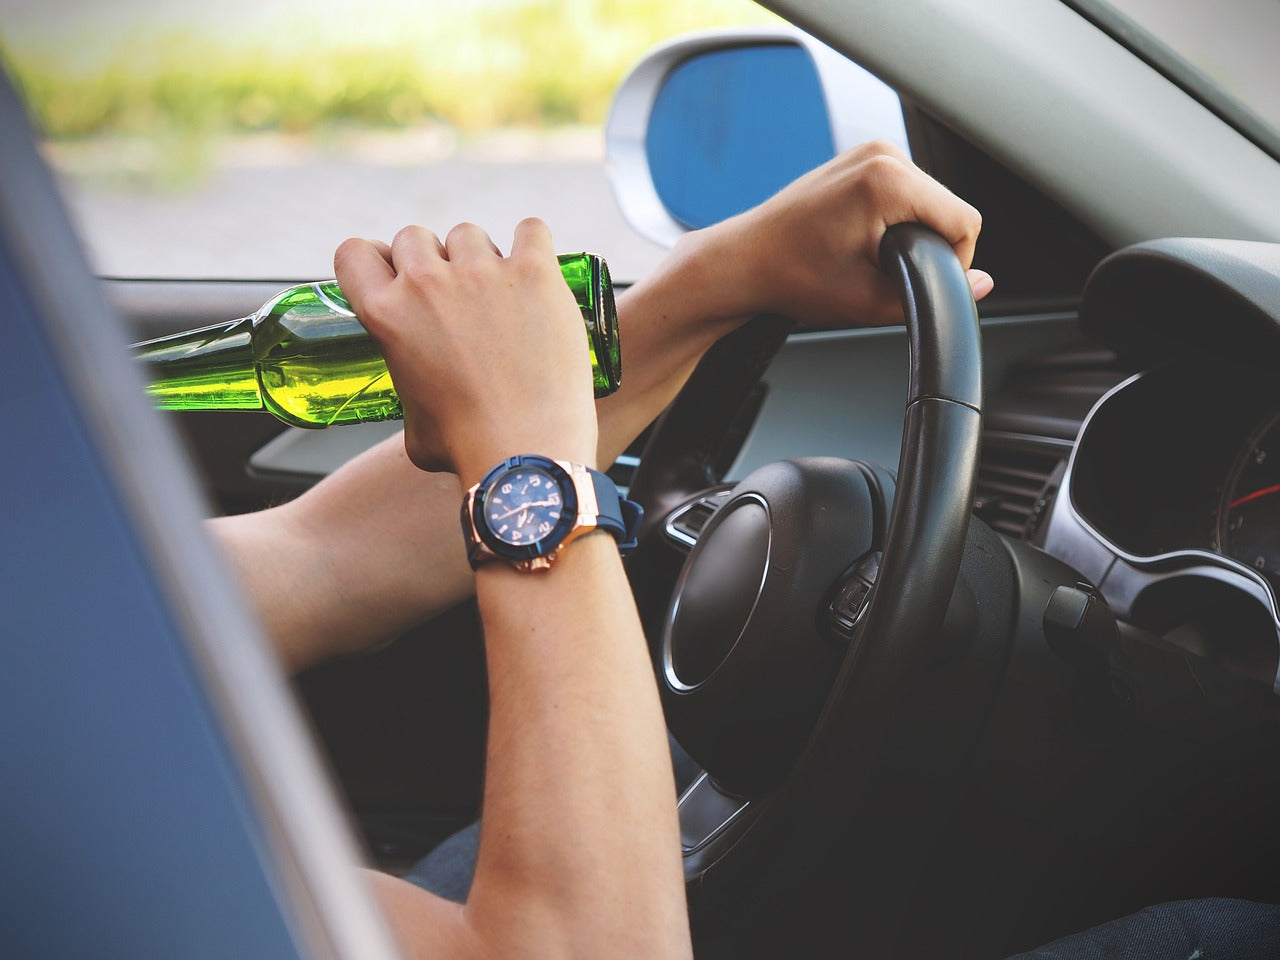 BLOOD ALCOHOL VS BREATH ALCOHOL: WHAT'S THE DIFFERENCE?